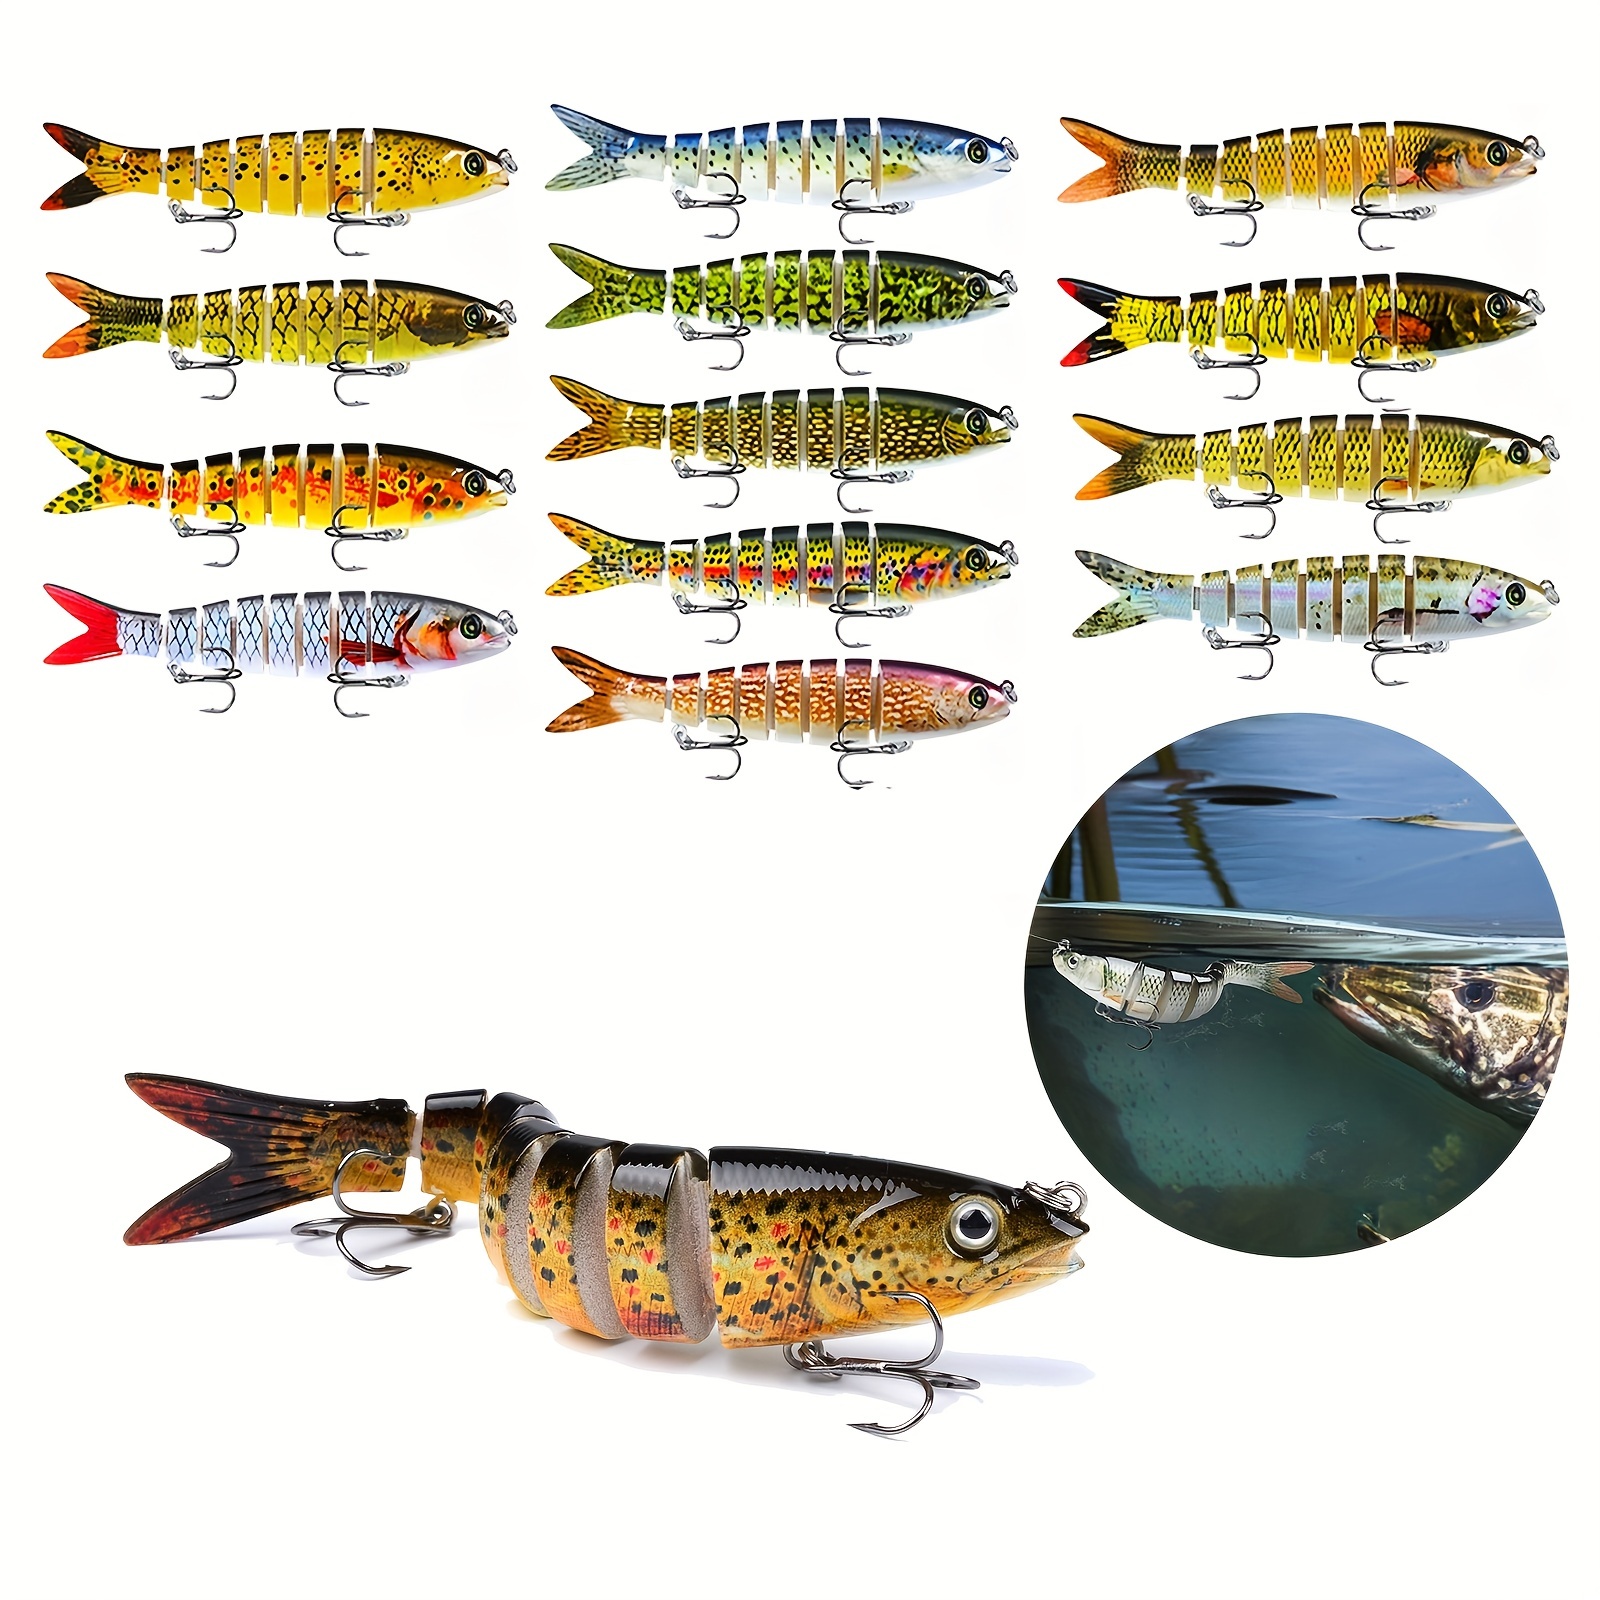 Fishing Lures For Bass Trout Multi Jointed Swimbaits Slow Sinking